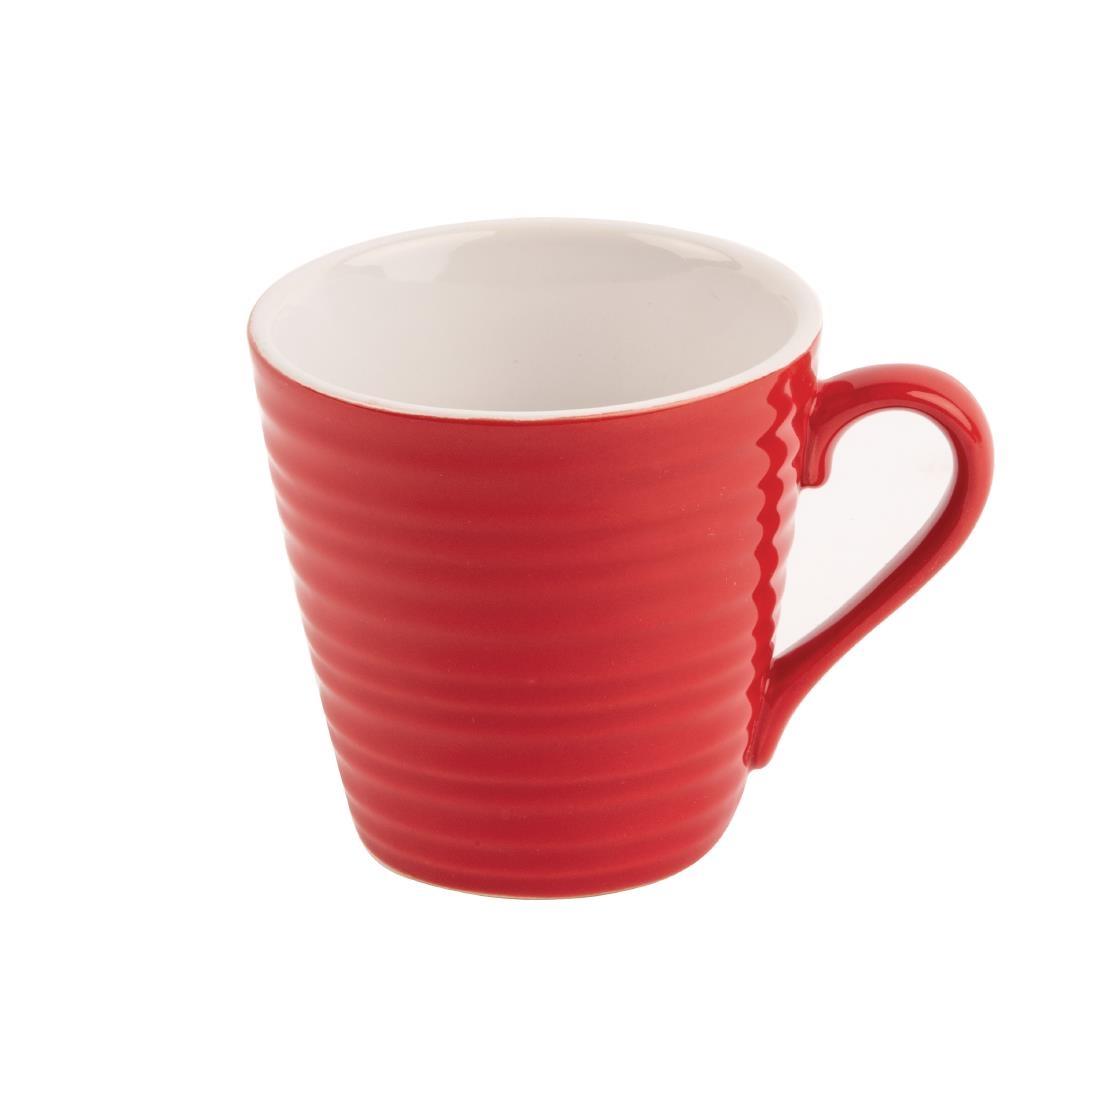 Olympia Café Aroma Mugs Red 340ml (Pack of 6) - DH632  - 1